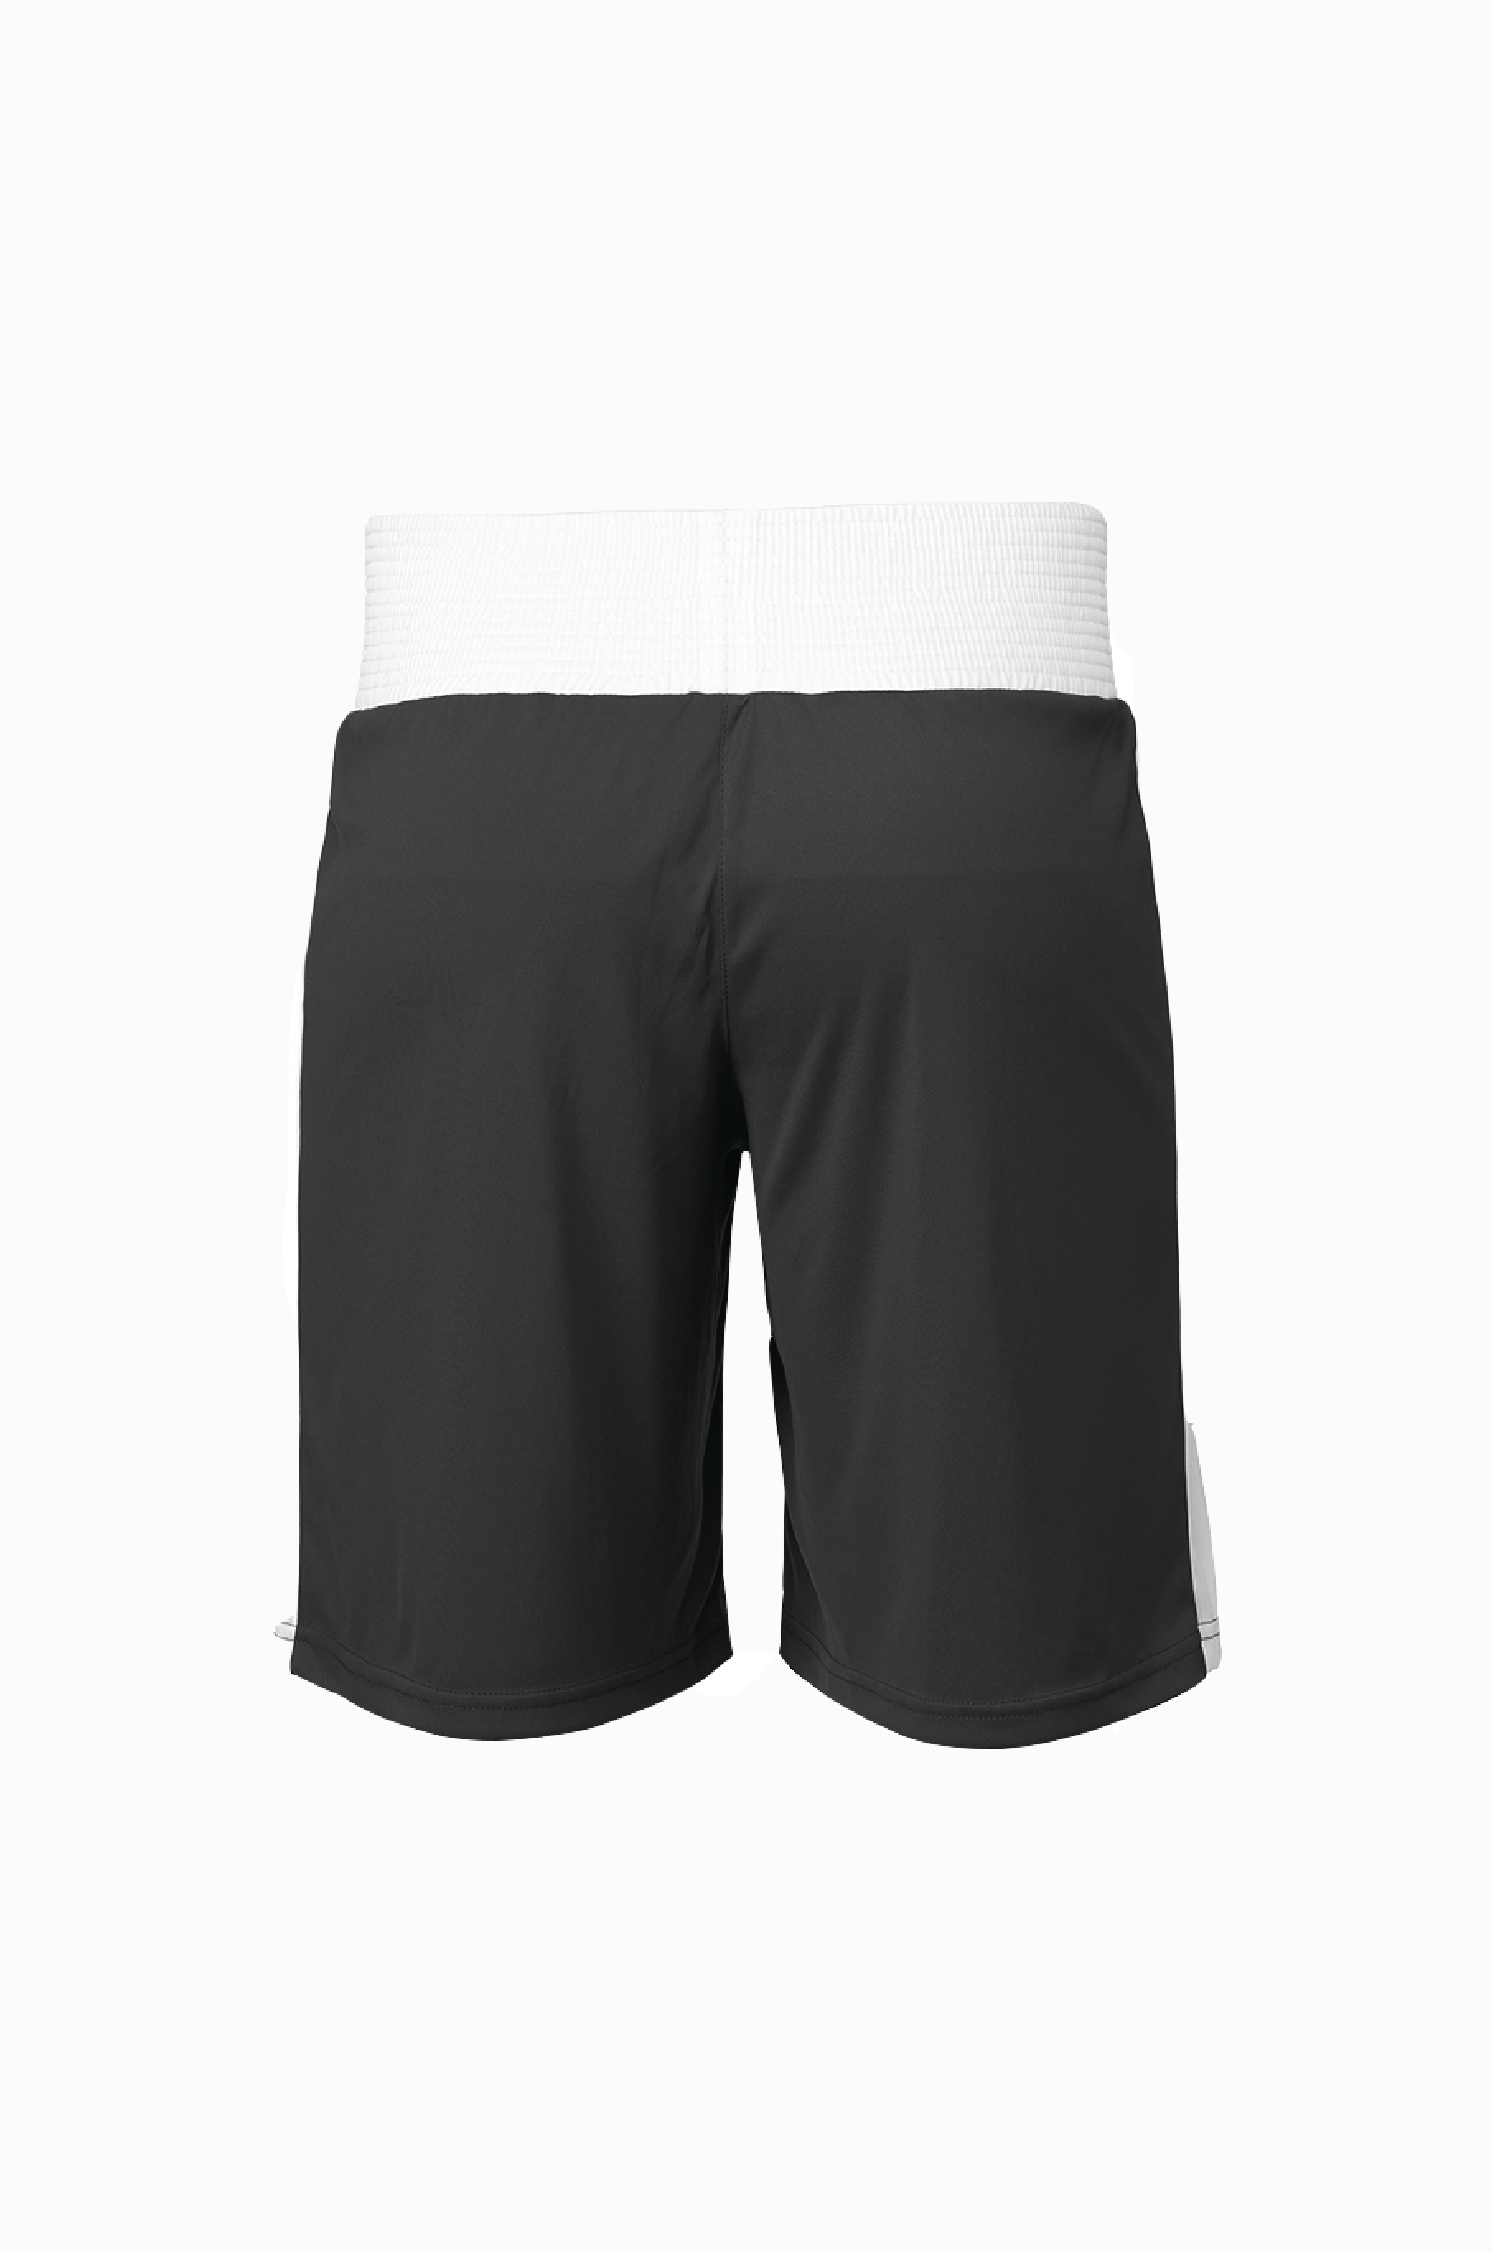 STING COMPETITION SHORTS